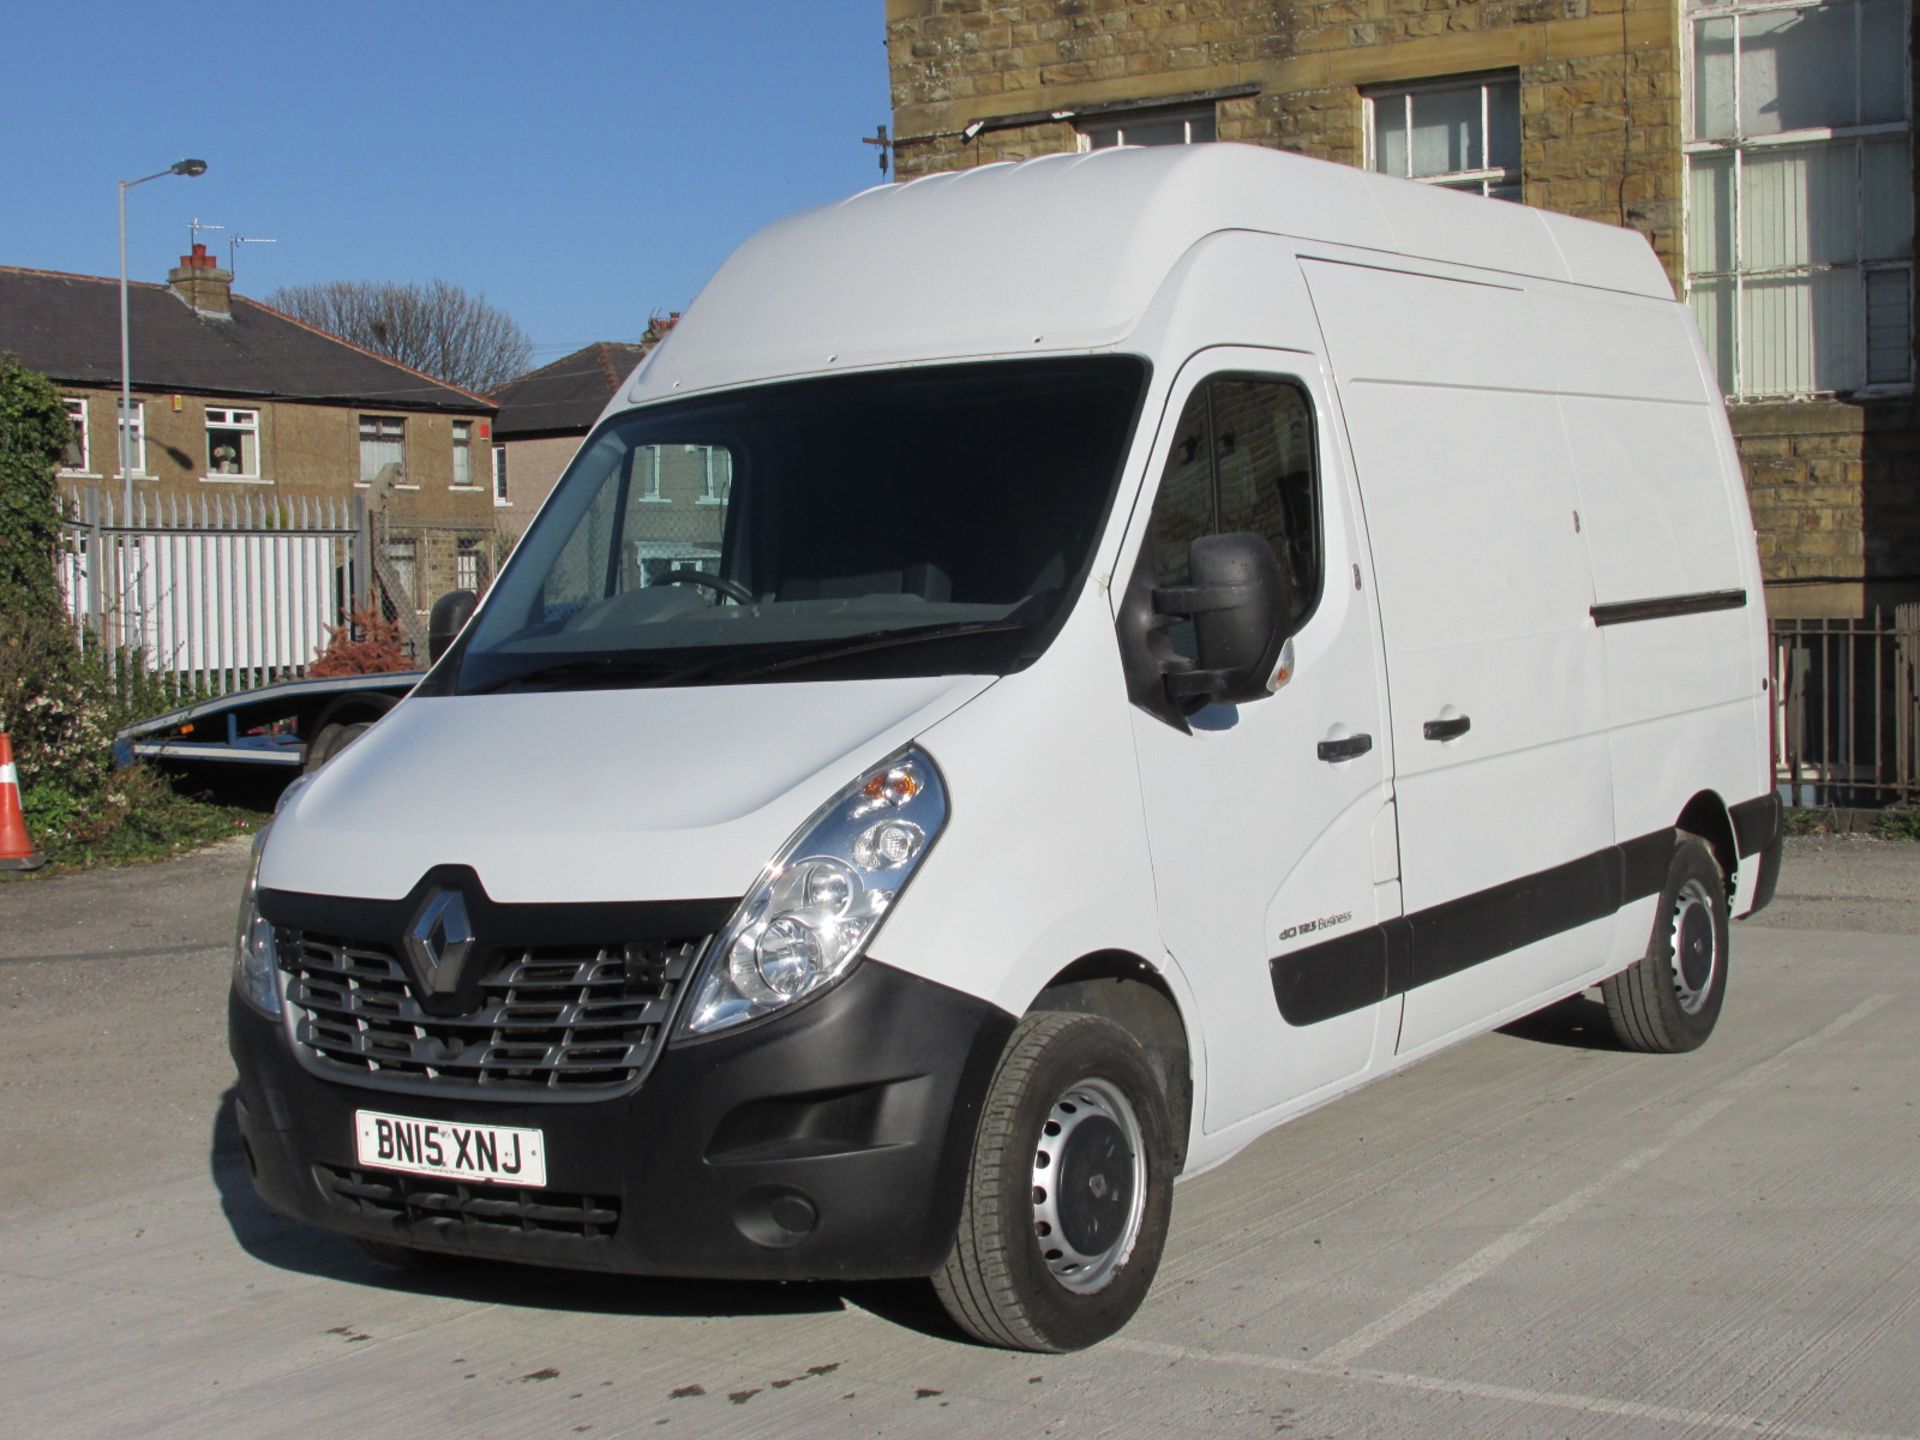 BN15 XNJ Renault Master MH35DCi 125High Roof - Image 24 of 39